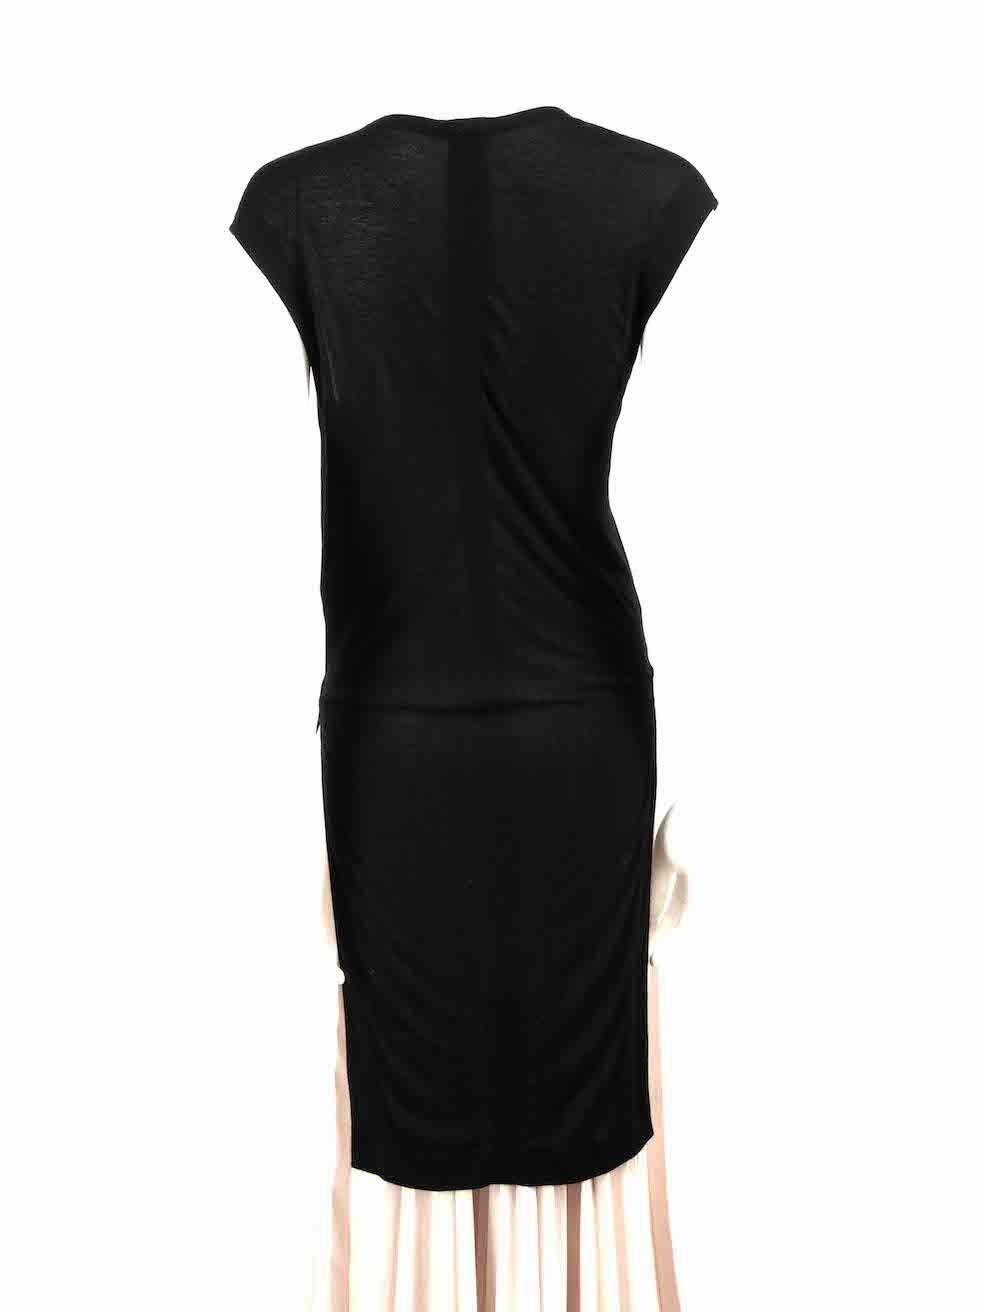 Helmut Lang Black V-Neck Sheer Long Top Size S In Good Condition For Sale In London, GB